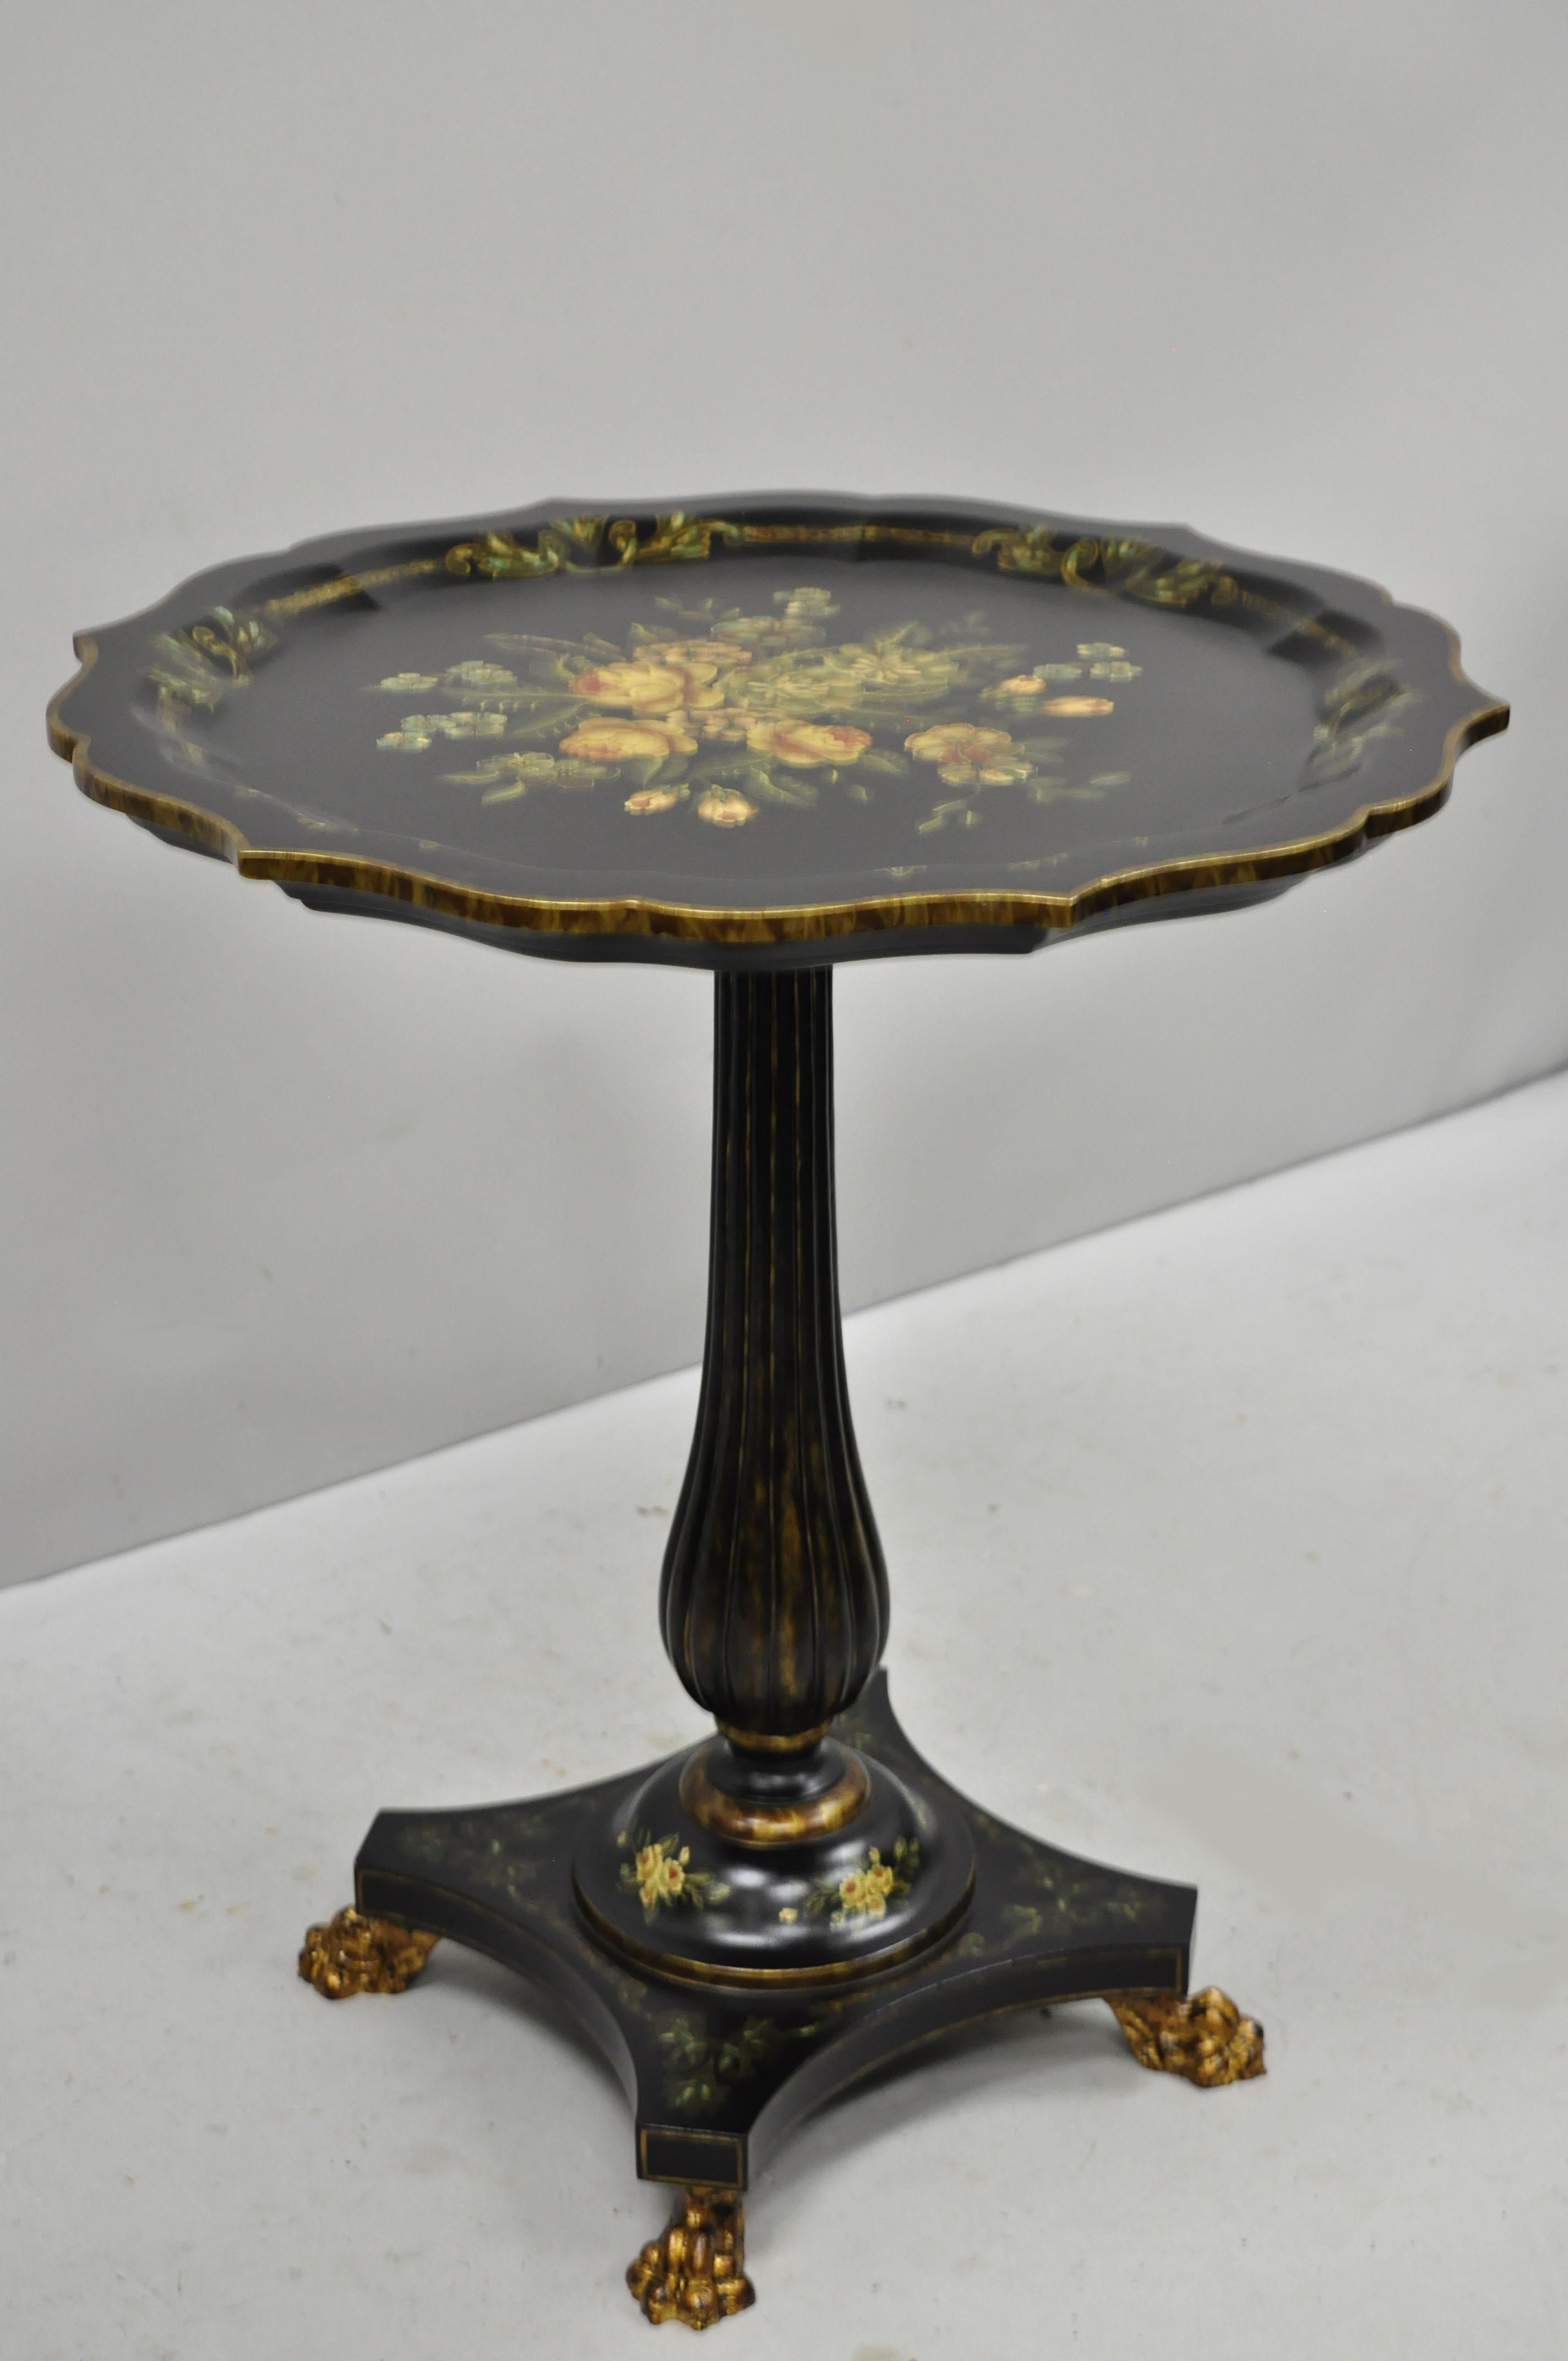 Maitland Smith Black French Victorian Floral Painted Pedestal Accent Side Table. Item features hand painted floral accents, metal paw feet, scallop edge top, black and gold finish, original label, great style and form. Circa Late 20th to Early 21st